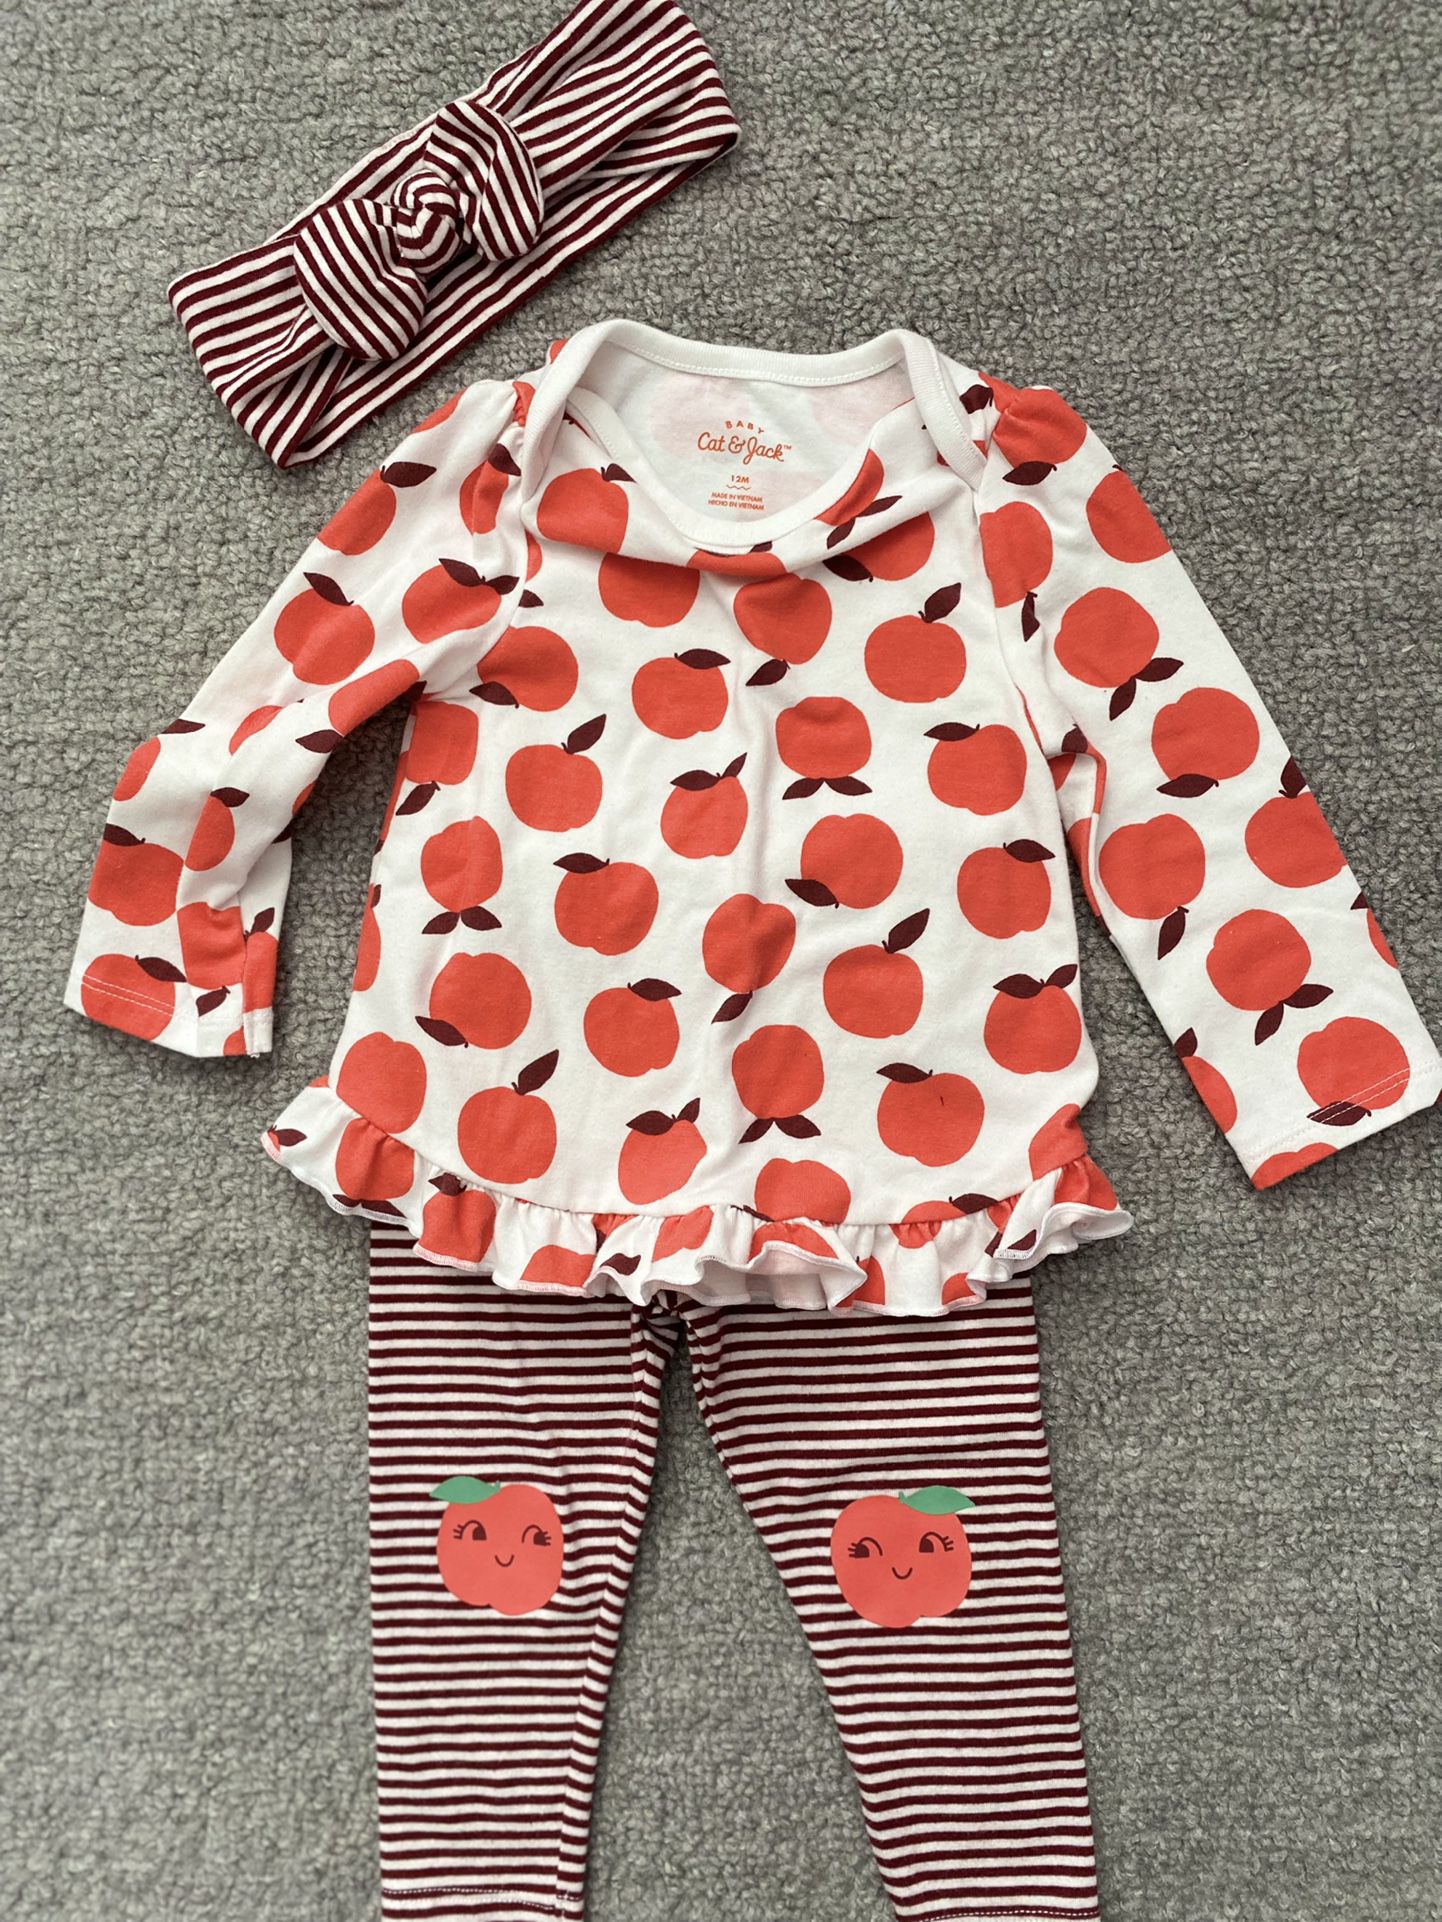 Baby Girl 12 Month Cat & Jack Outfit 